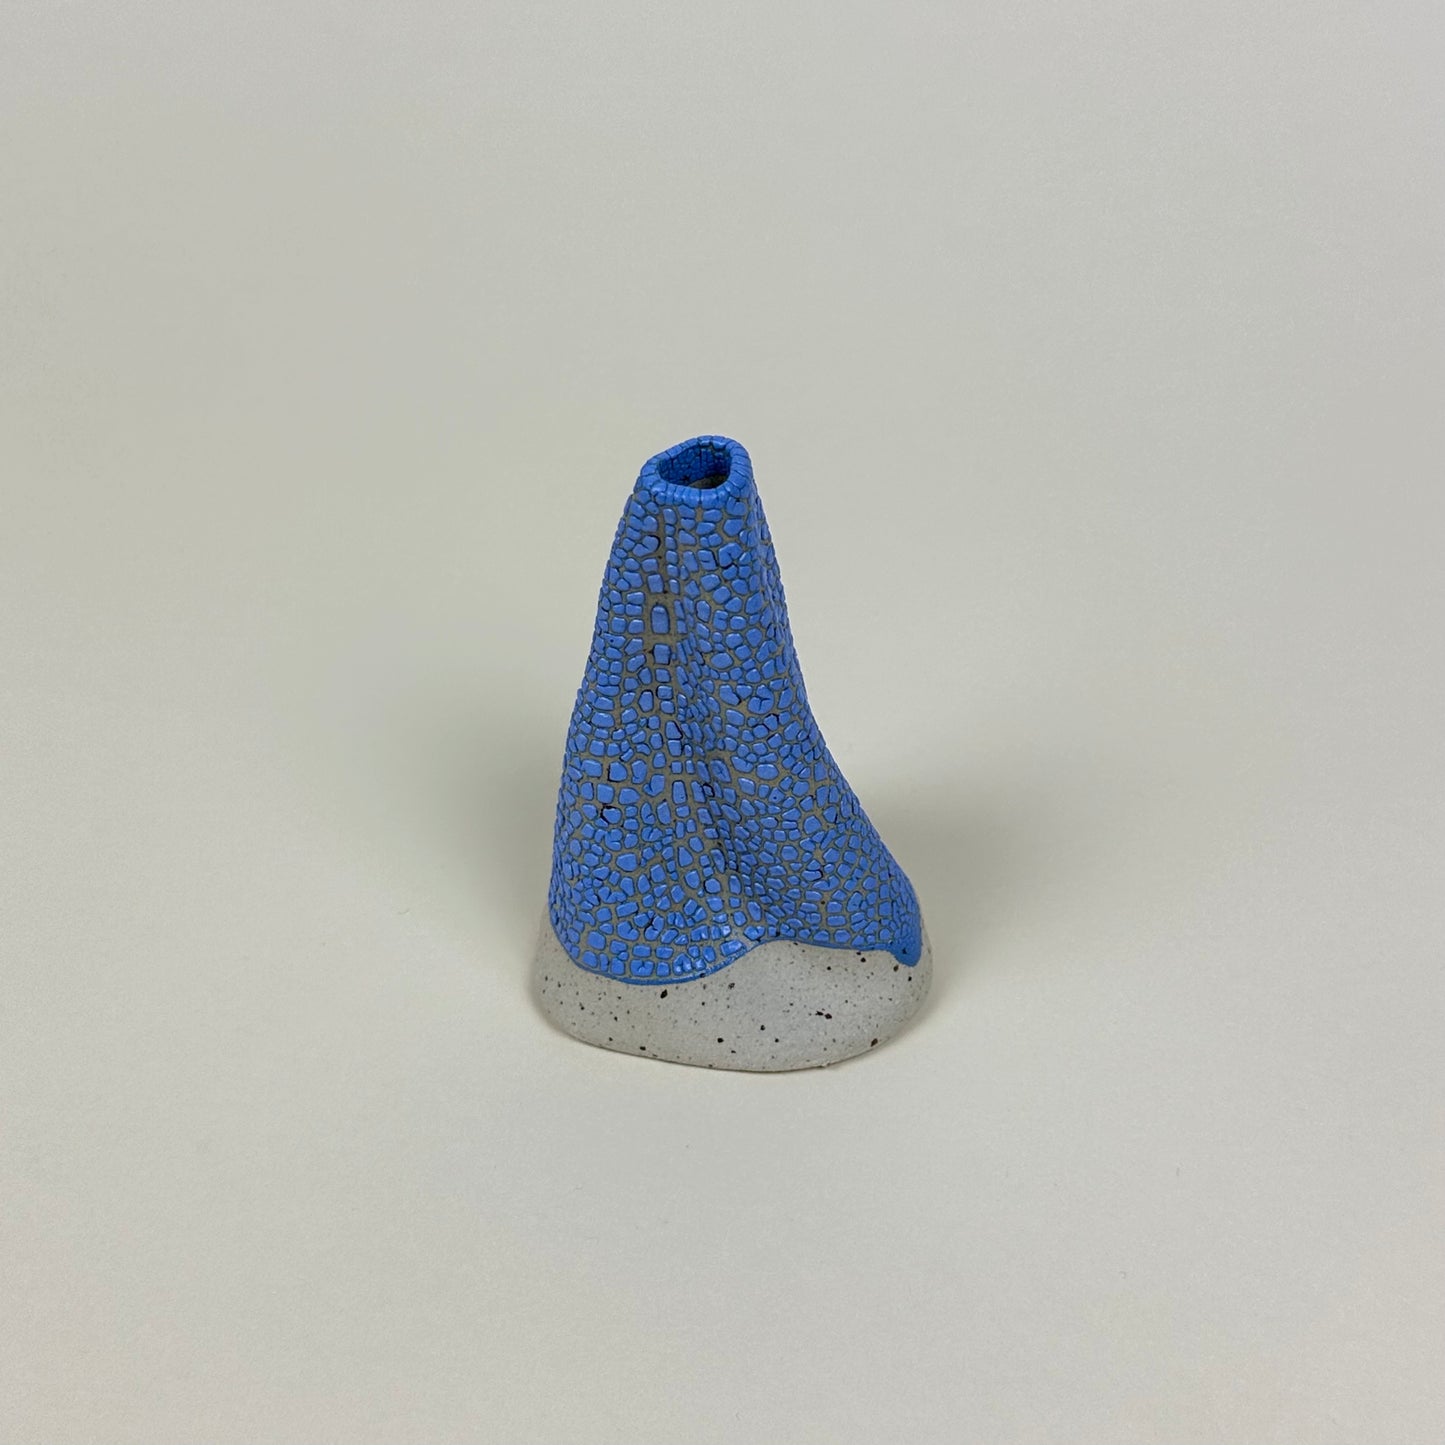 Stone and blue volcano vase (S) by Astrid Öhman